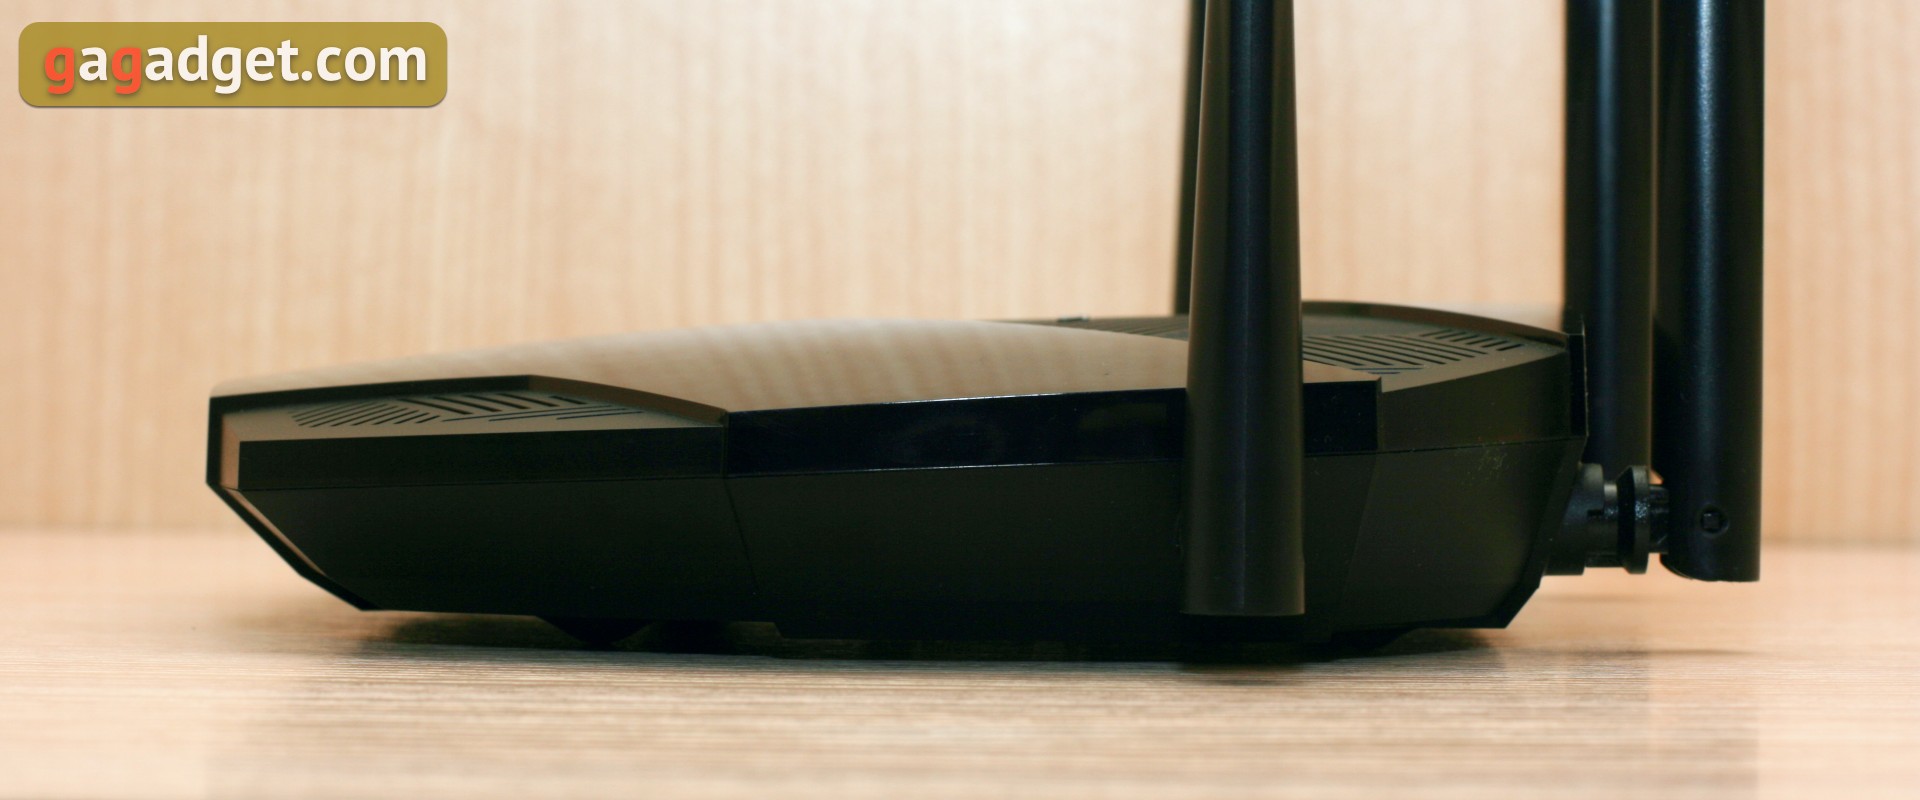 Mercusys MR70X review: the most affordable Gigabit router with Wi-Fi 6-16